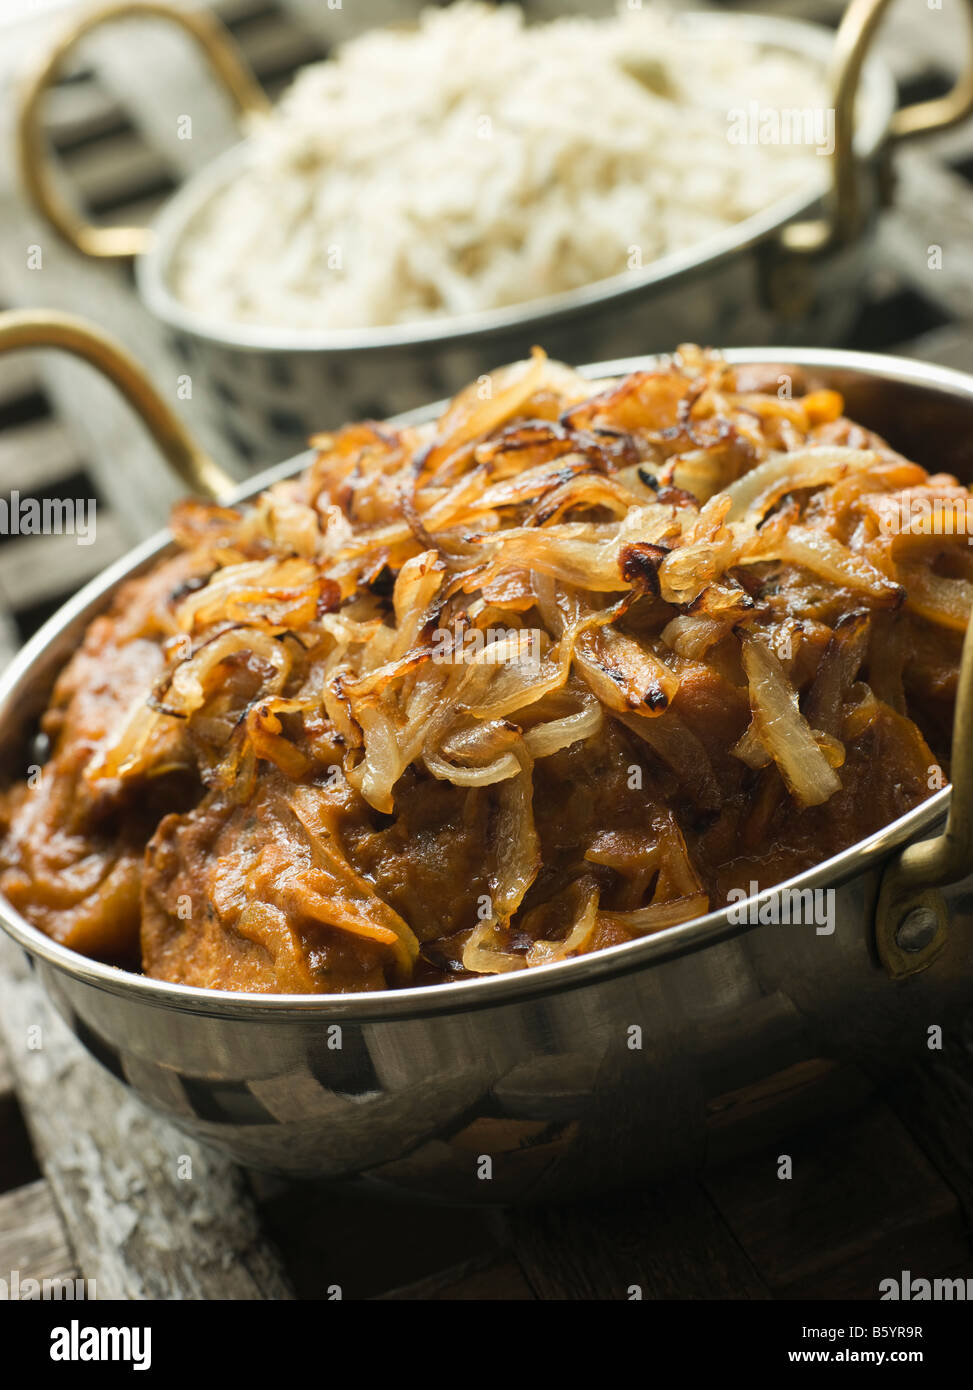 Dish of Dopiaza Veal with Fragrant Pilau Rice Stock Photo